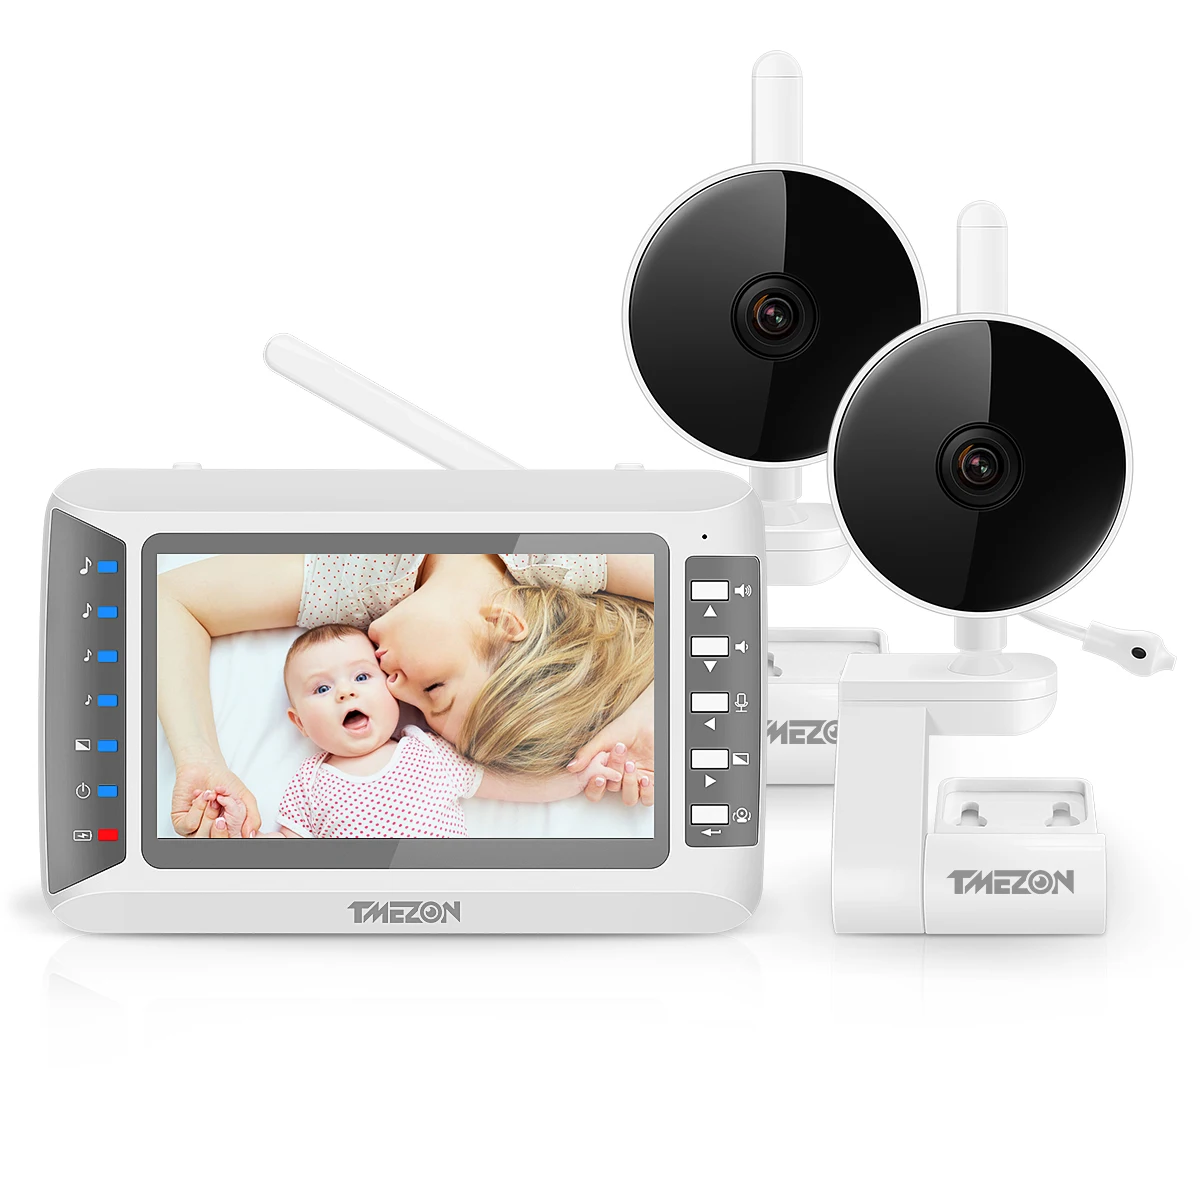 Enlarge TMEZON 1080P Baby Monitor HD Wifi Wireless Home Security 2 *2.0MP IR Network CCTV Camera with Two-way Audio Surveillance Camera